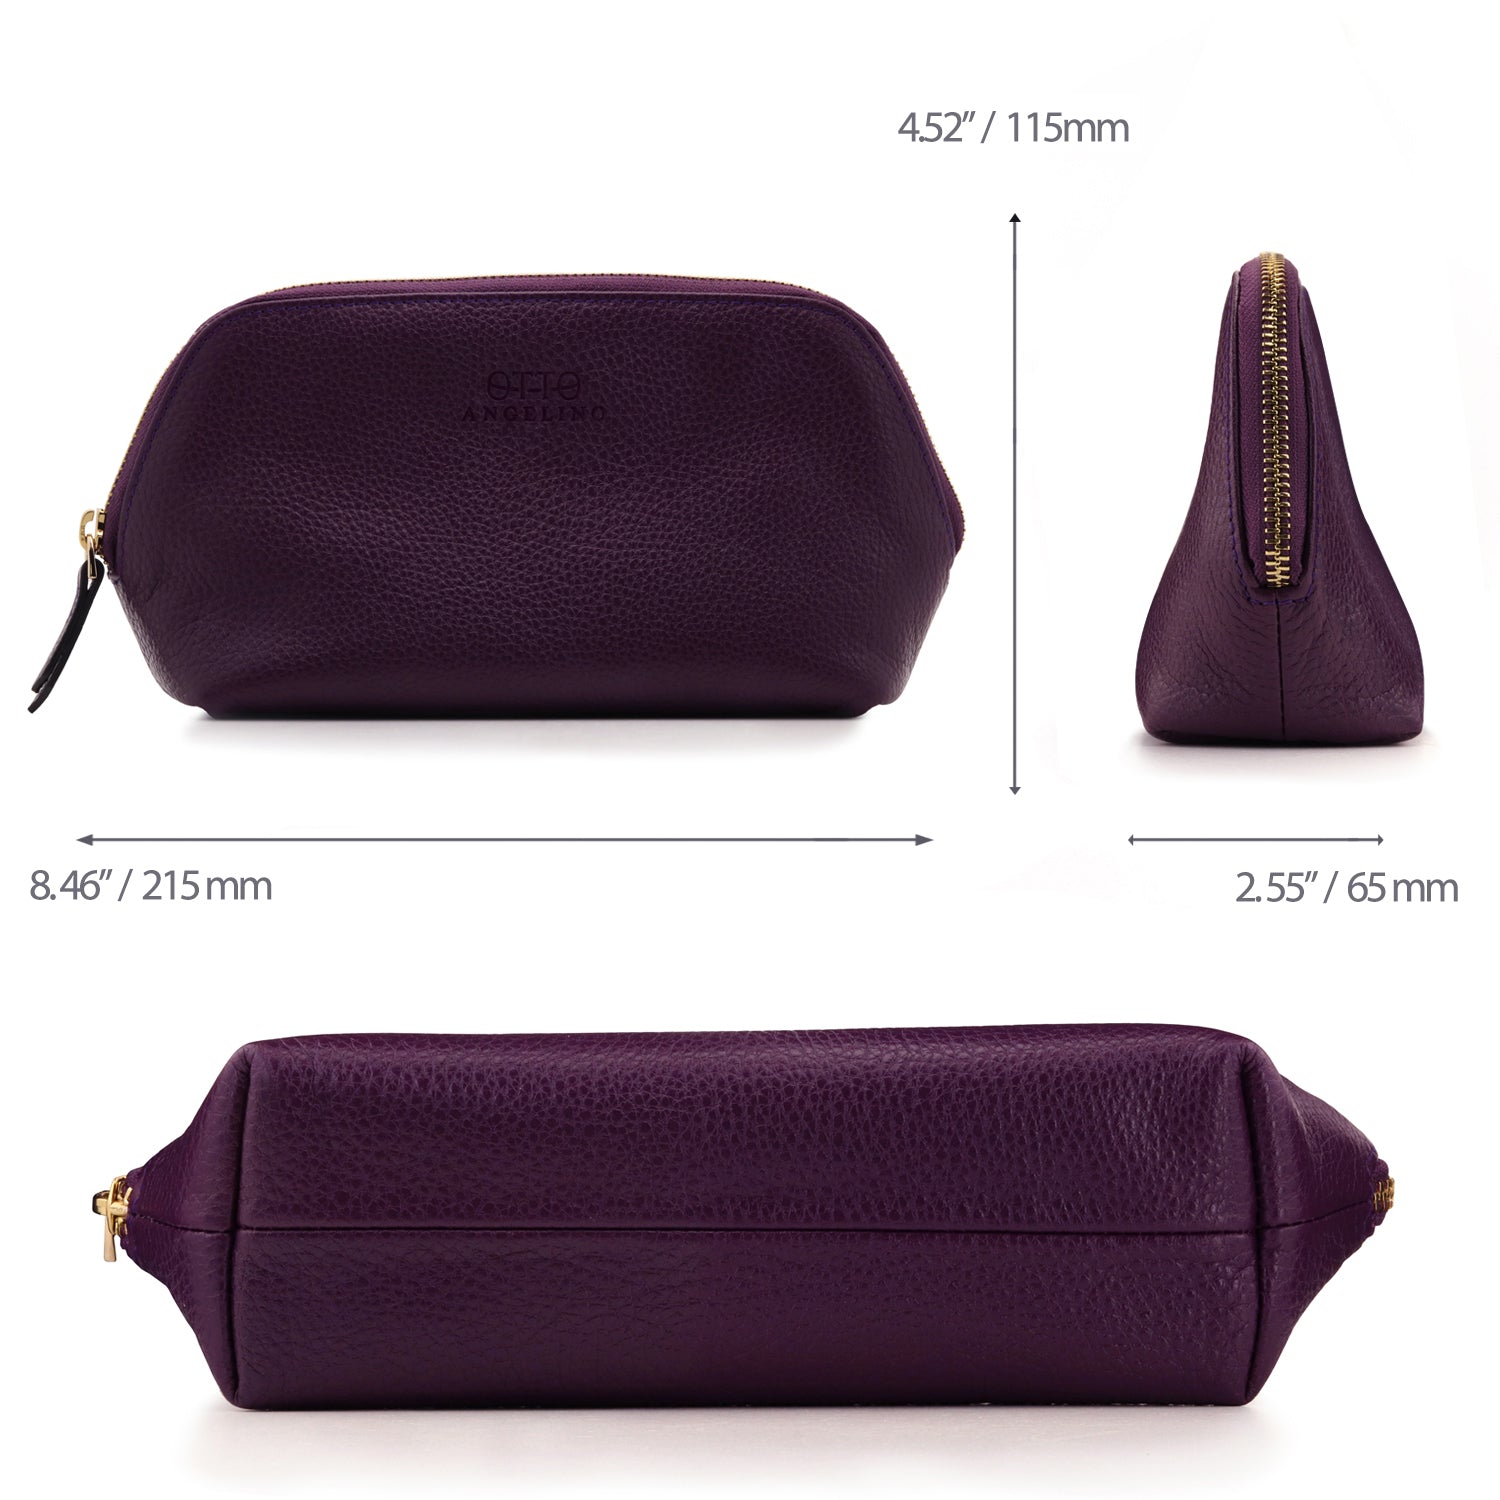 ON SALE / Marmont-Top-Handle-M / 2mm Lavender) Bag Organizer for